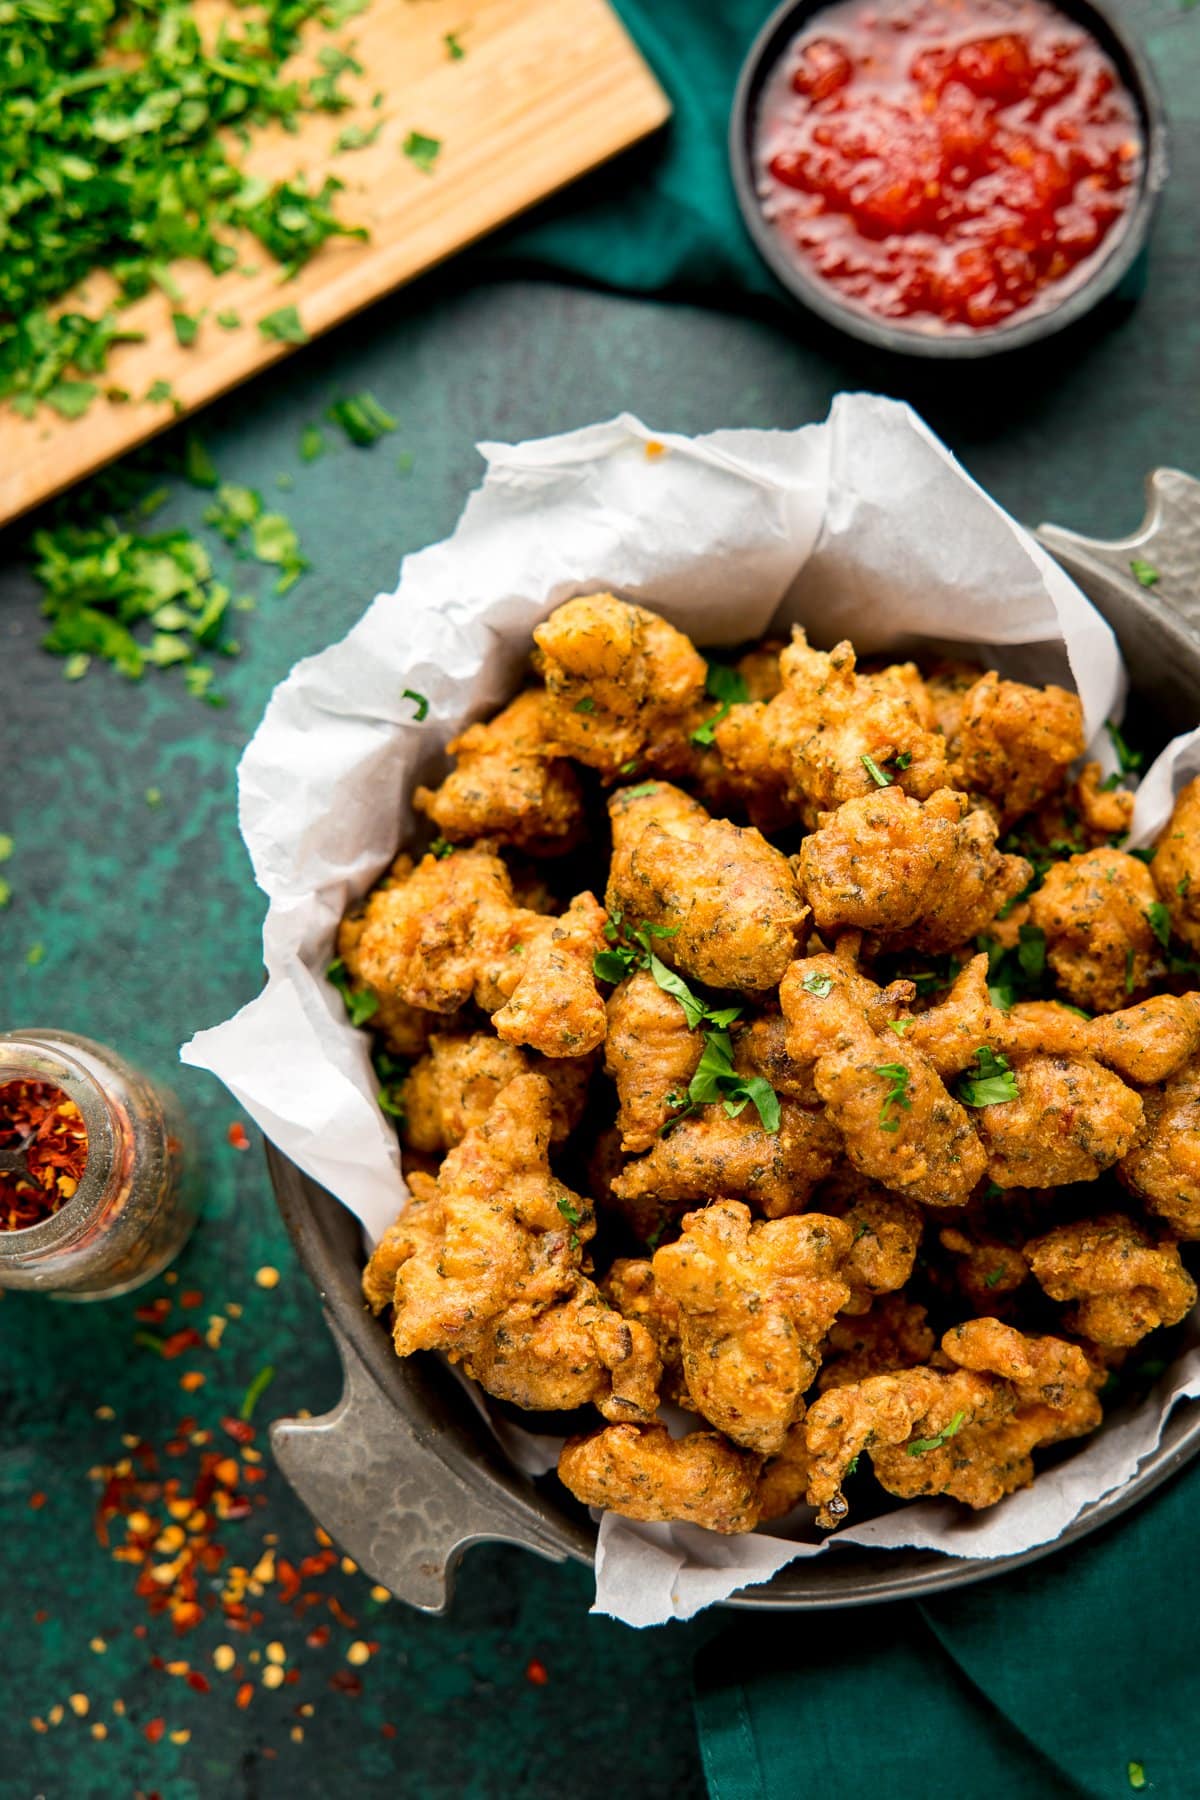 Overhead image of a bowl of chicken pakora on a green background with chilli sauce, chilli flakes and coriander scattered around